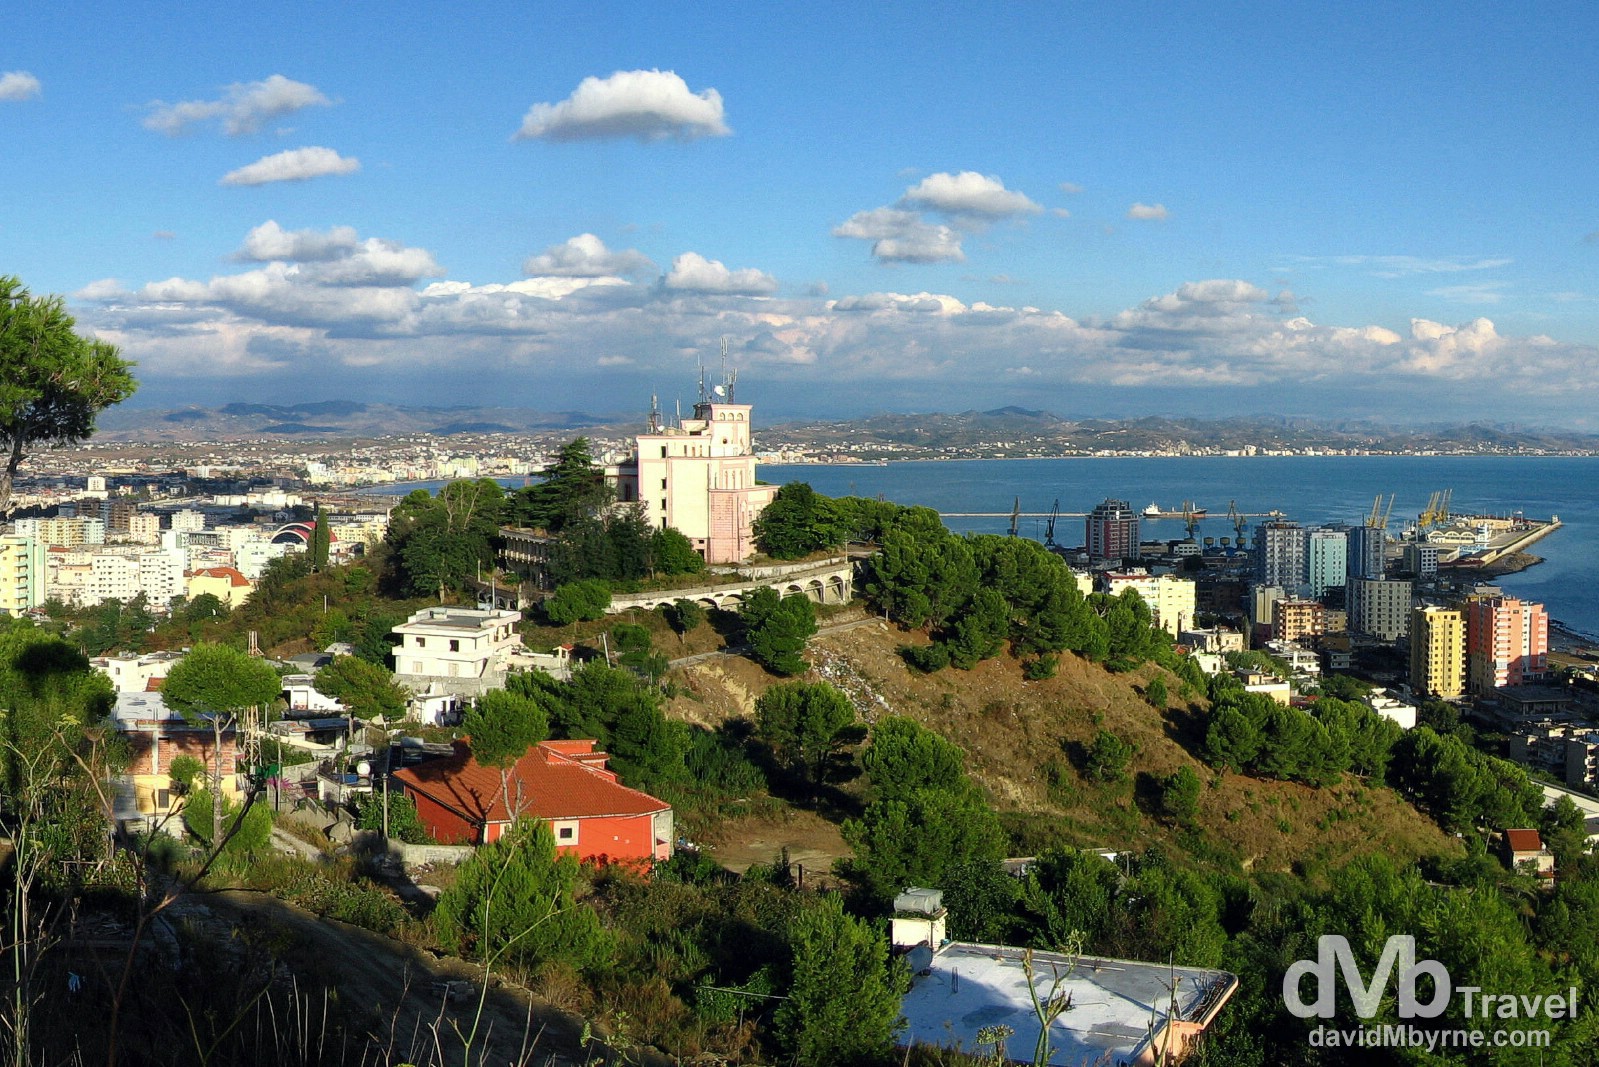 The port of Durres, Albania's second city, from a viewpoint overlooking the city. September 7th, 2007.